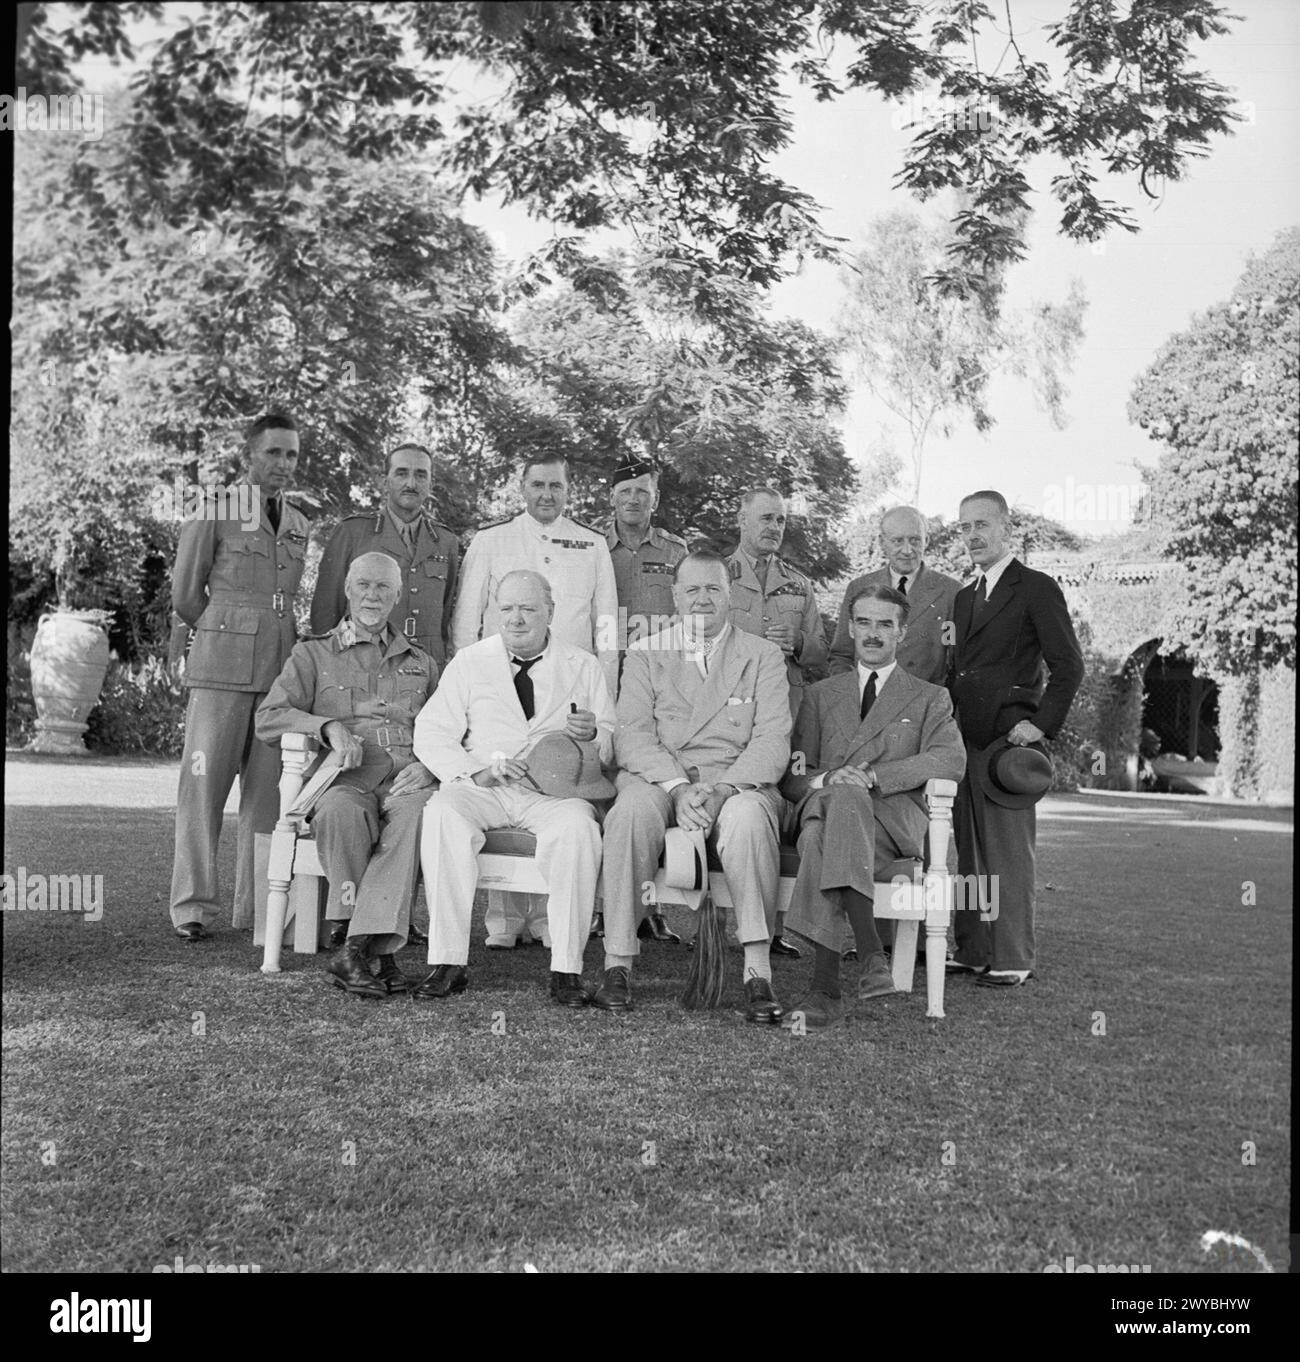 WINSTON CHURCHILL IN THE SECOND WORLD WAR - Churchill with members of the Middle East War Council in the gardens of the British Embassy in Cairo, 5 August 1942. Back row, left to right: Air Chief Marshal Sir Arthur Tedder, General Sir Alan Brooke, Admiral Sir H Harwood, General Sir Claude Auchinleck, General Wavell, Sir Charles Wilson, Sir Alexander Cadogan. Front row: Field Marshal Smuts, Winston Churchill, His Excellency Sir Miles Lampson (British Ambassador), Rt Hon R G Casey (Minister of State Middle East). , Tedder, Arthur William, Brooke, Alan Francis, Churchill, Winston Leonard Spencer, Stock Photo